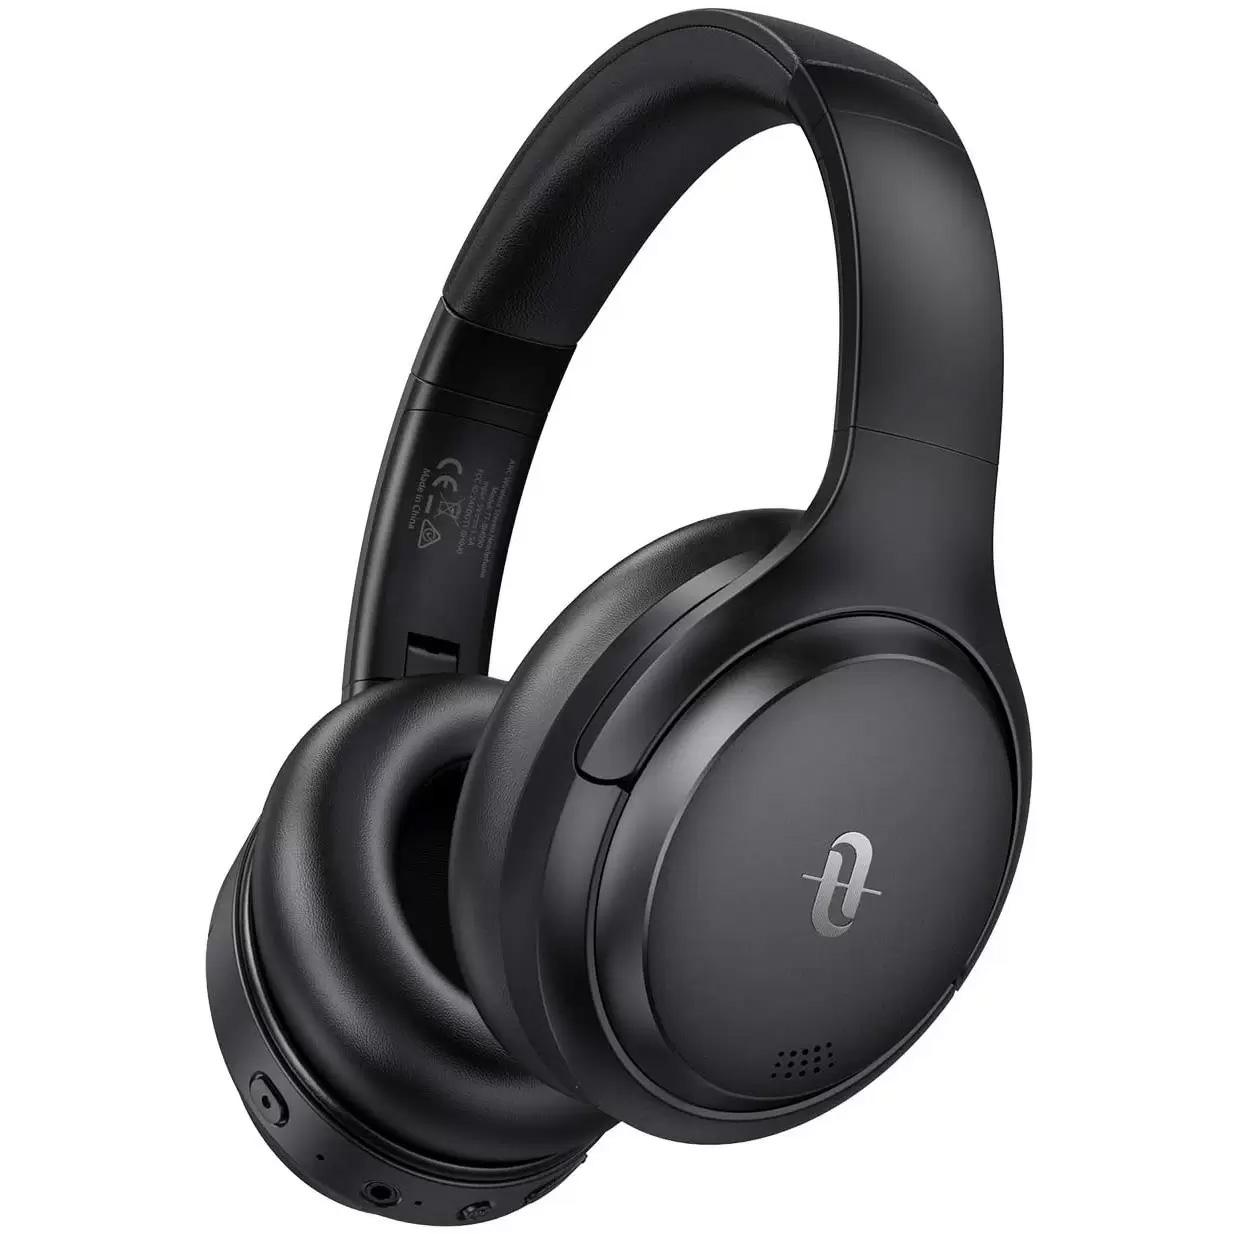 TaoTronics BH090 Active Noise Cancelling Bluetooth Headphones for $39.99 Shipped